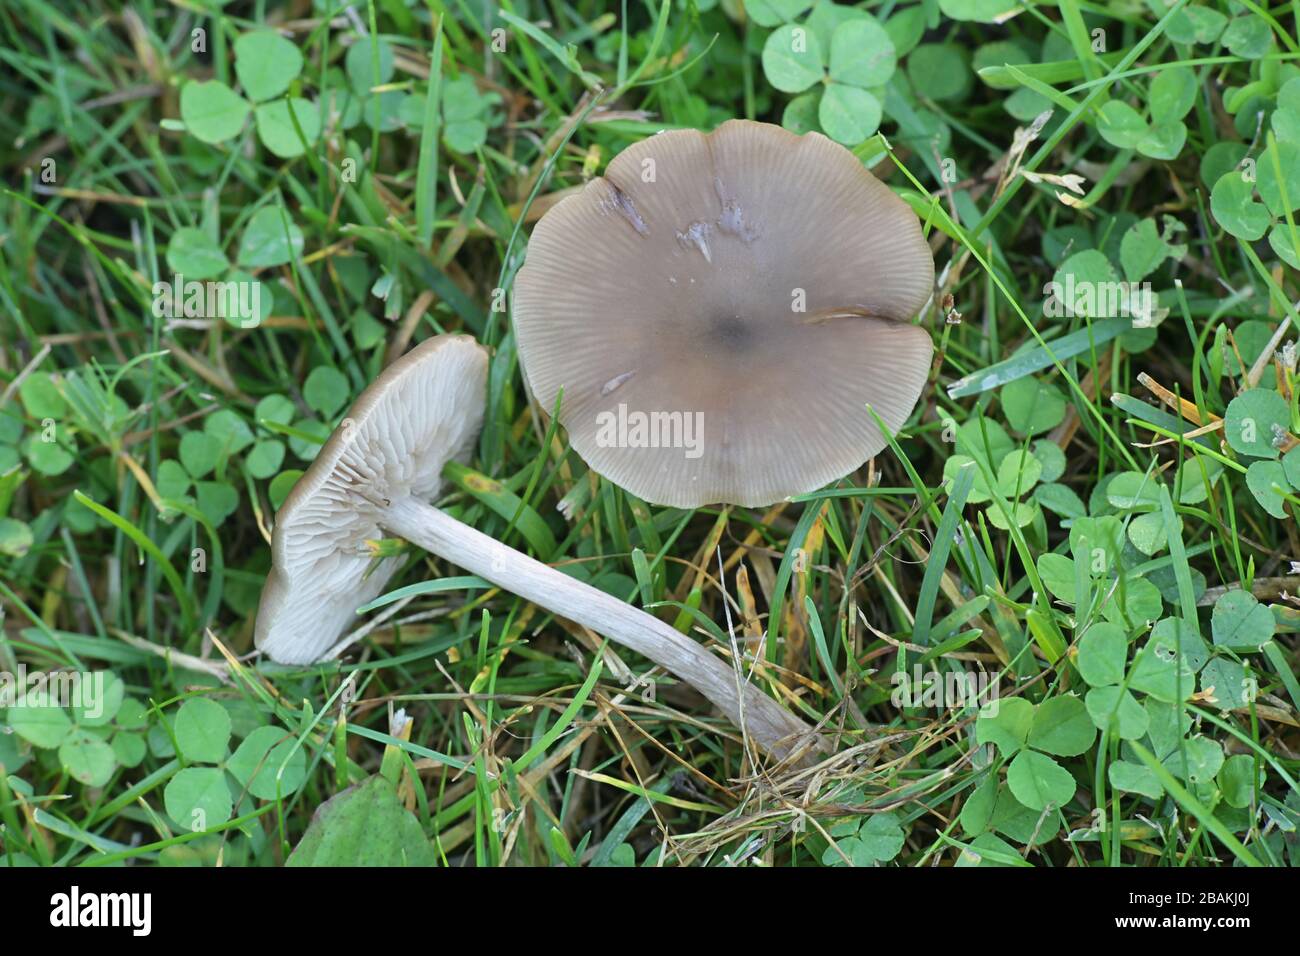 Entoloma sericeum, commonly known as the silky pinkgill, wild mushroom from Finland Stock Photo